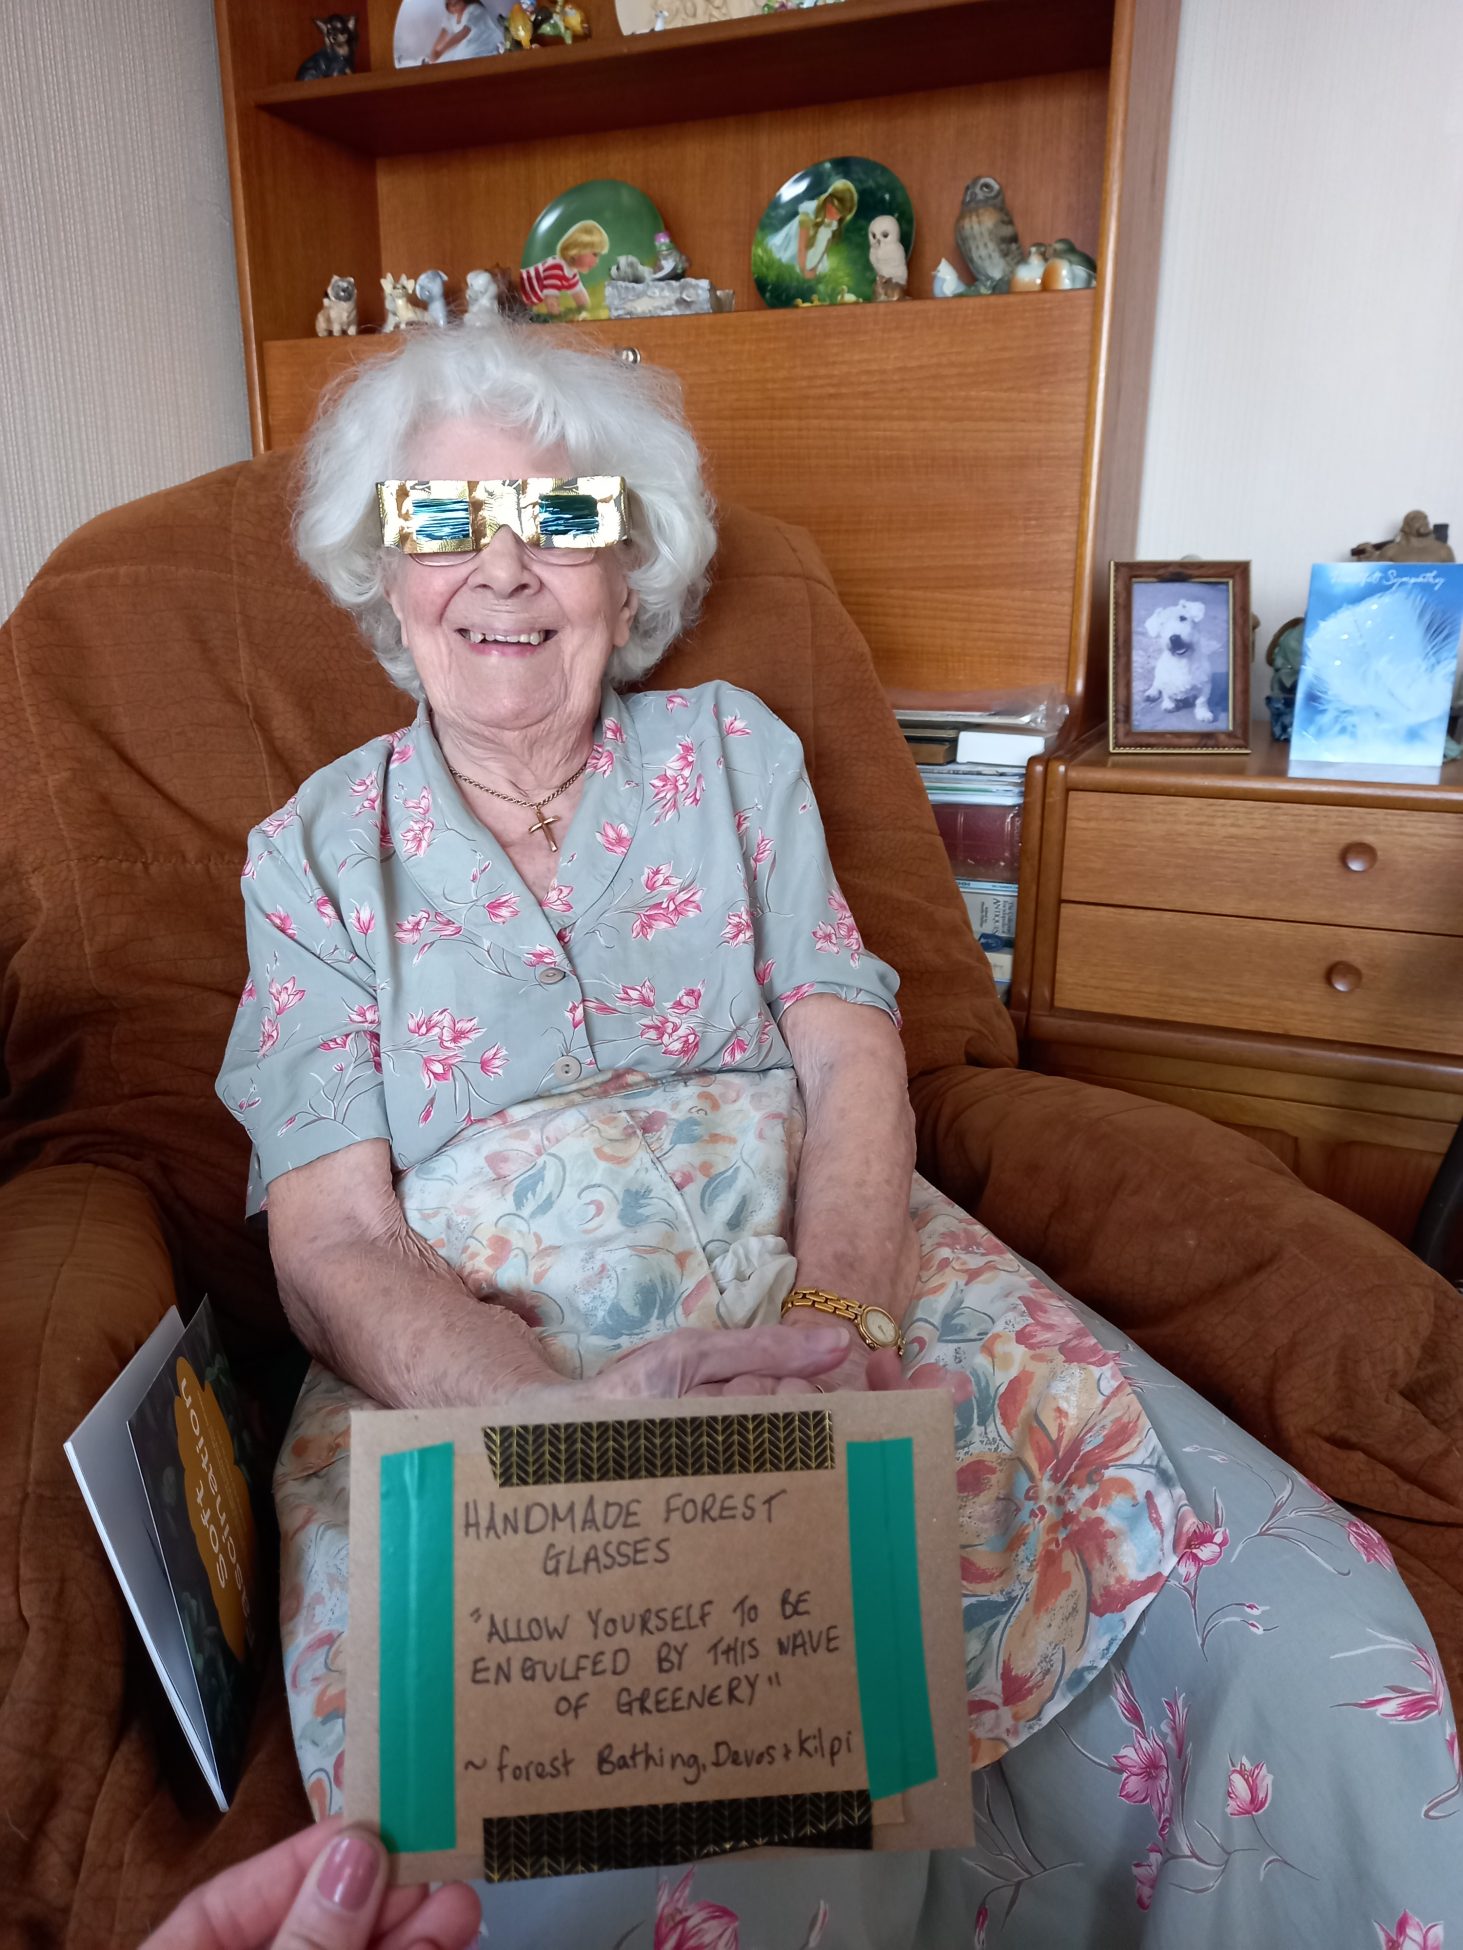 A photo of an older lady with white hair trying on the forest glasses from her forest bathing box. She is smiling.